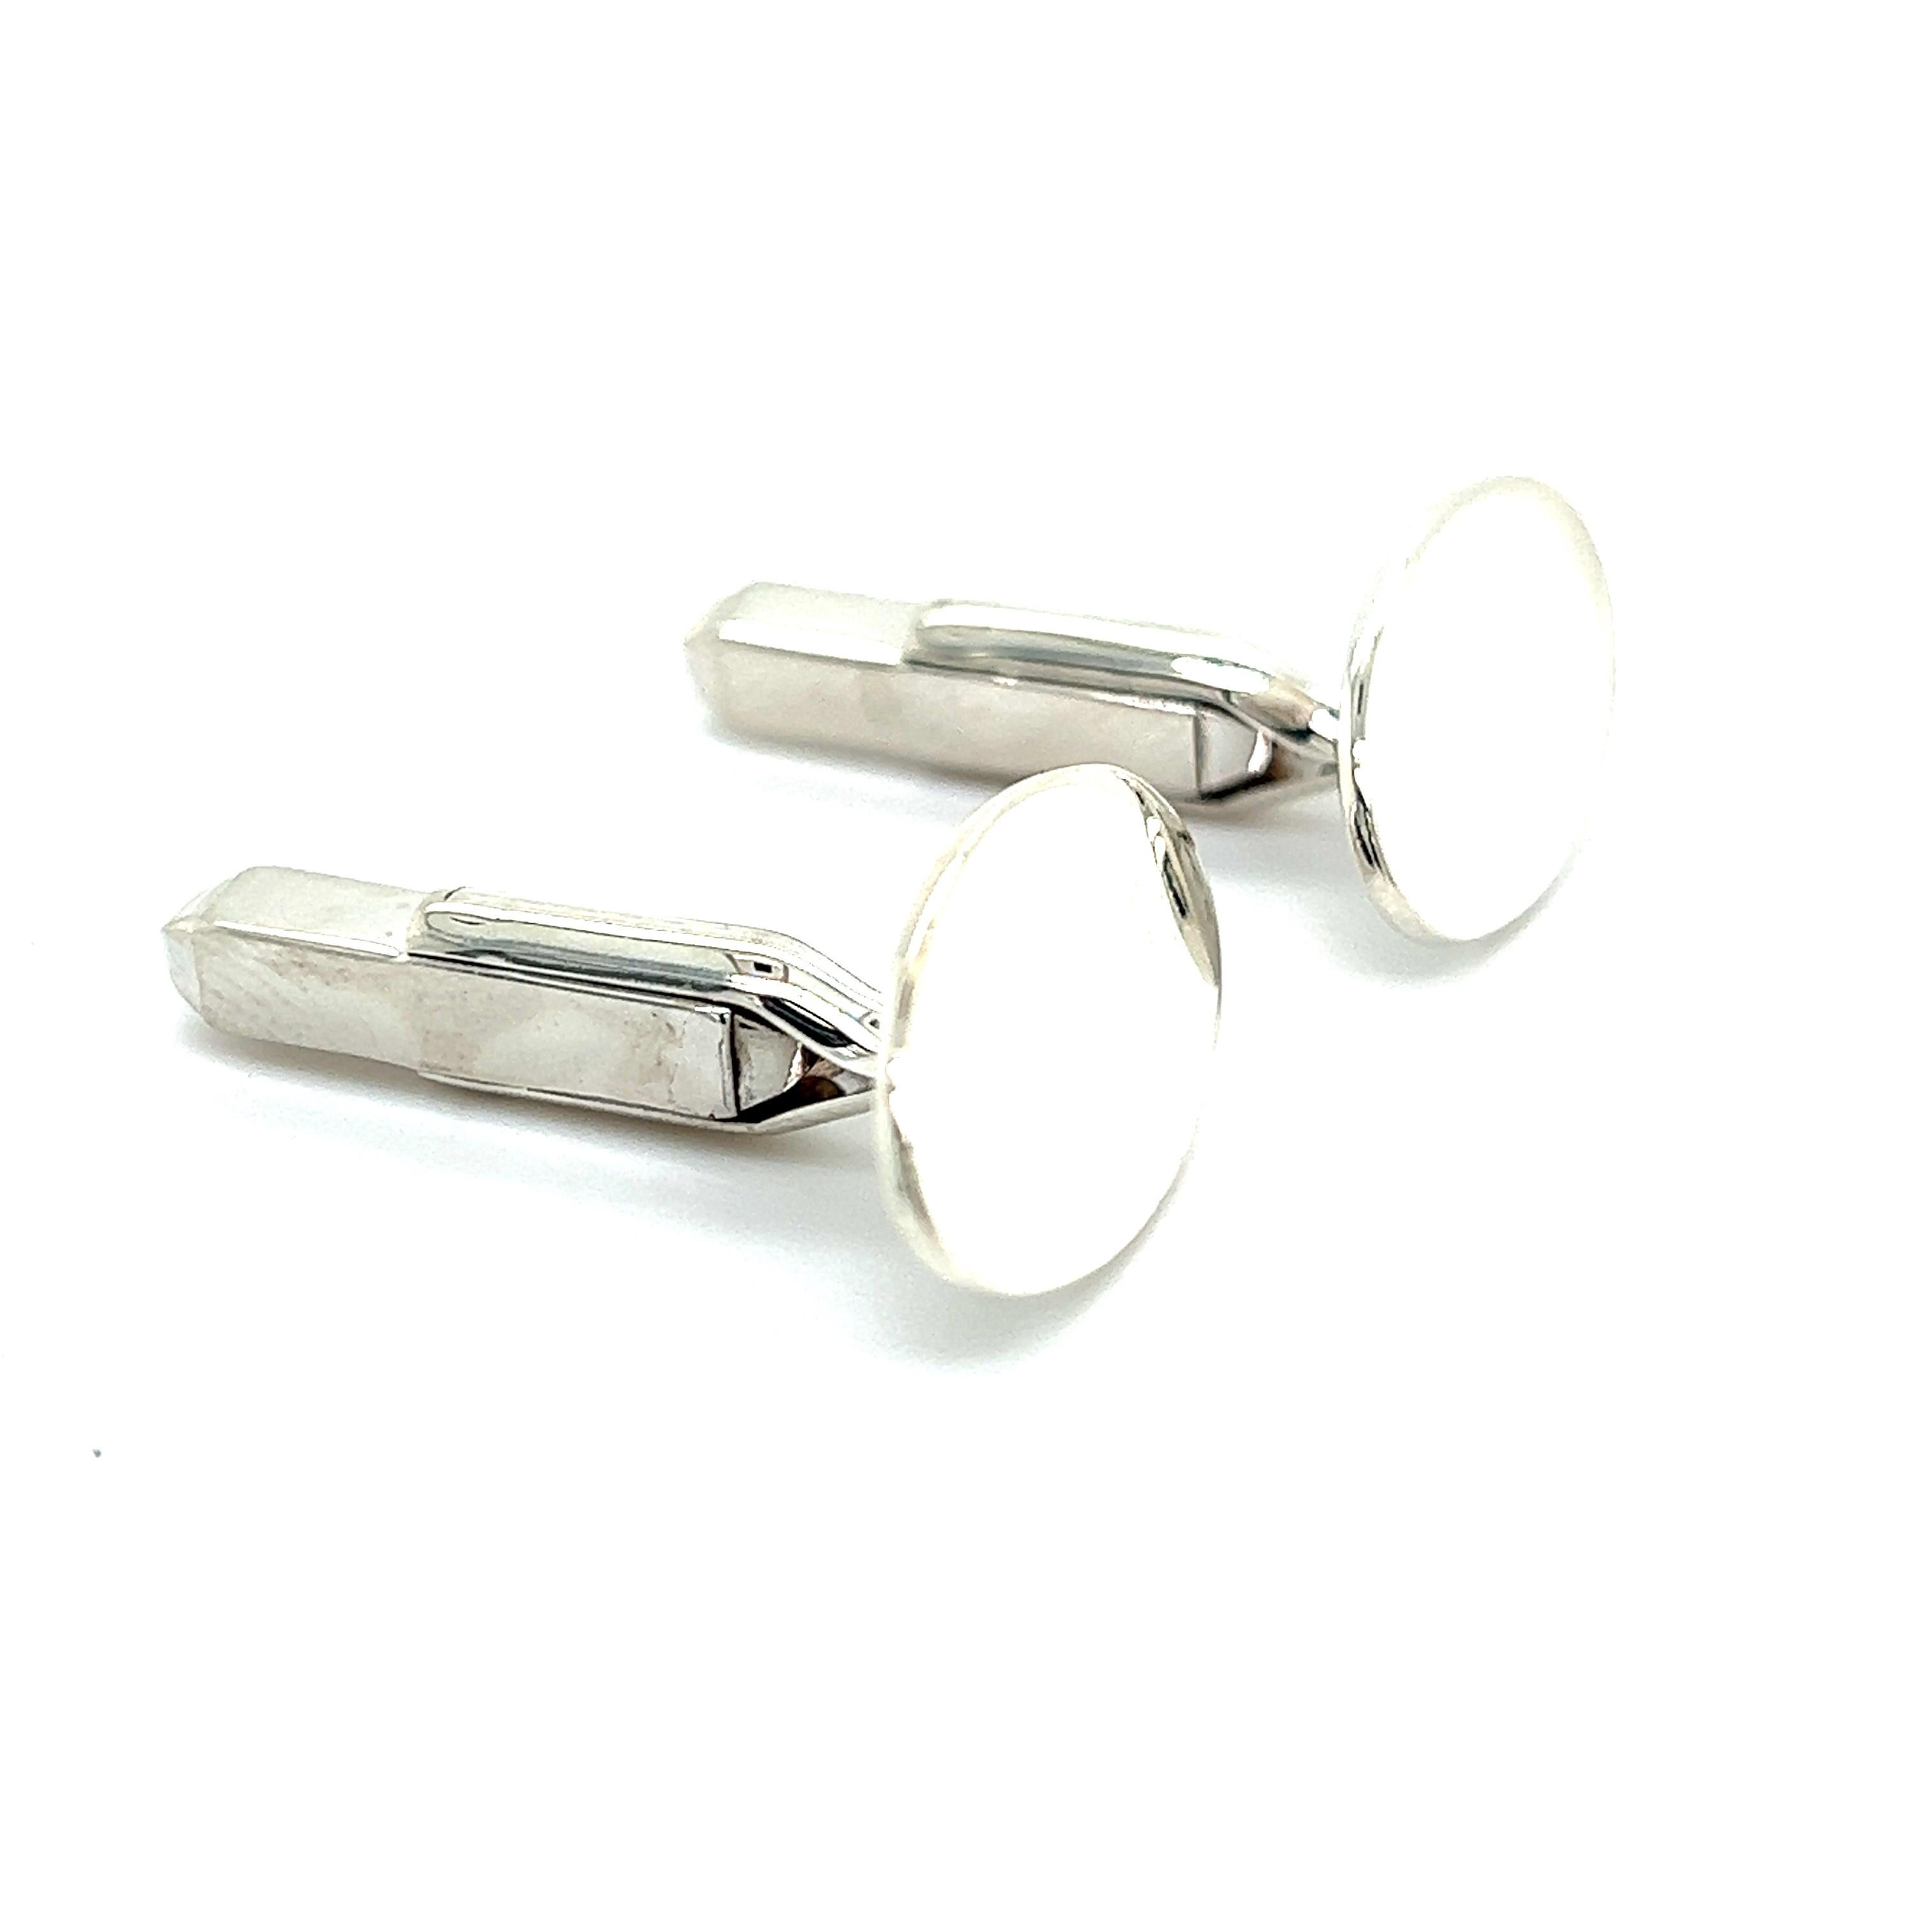 Bulgari Bvlgari Estate Engraveable Mens Cufflinks Sterling Silver B4

TRUSTED SELLER SINCE 2002

PLEASE SEE OUR HUNDREDS OF POSITIVE FEEDBACKS FROM OUR CLIENTS!!

FREE SHIPPING

DETAILS
Material: Sterling Silver
Weight: 8 Grams

These Authentic